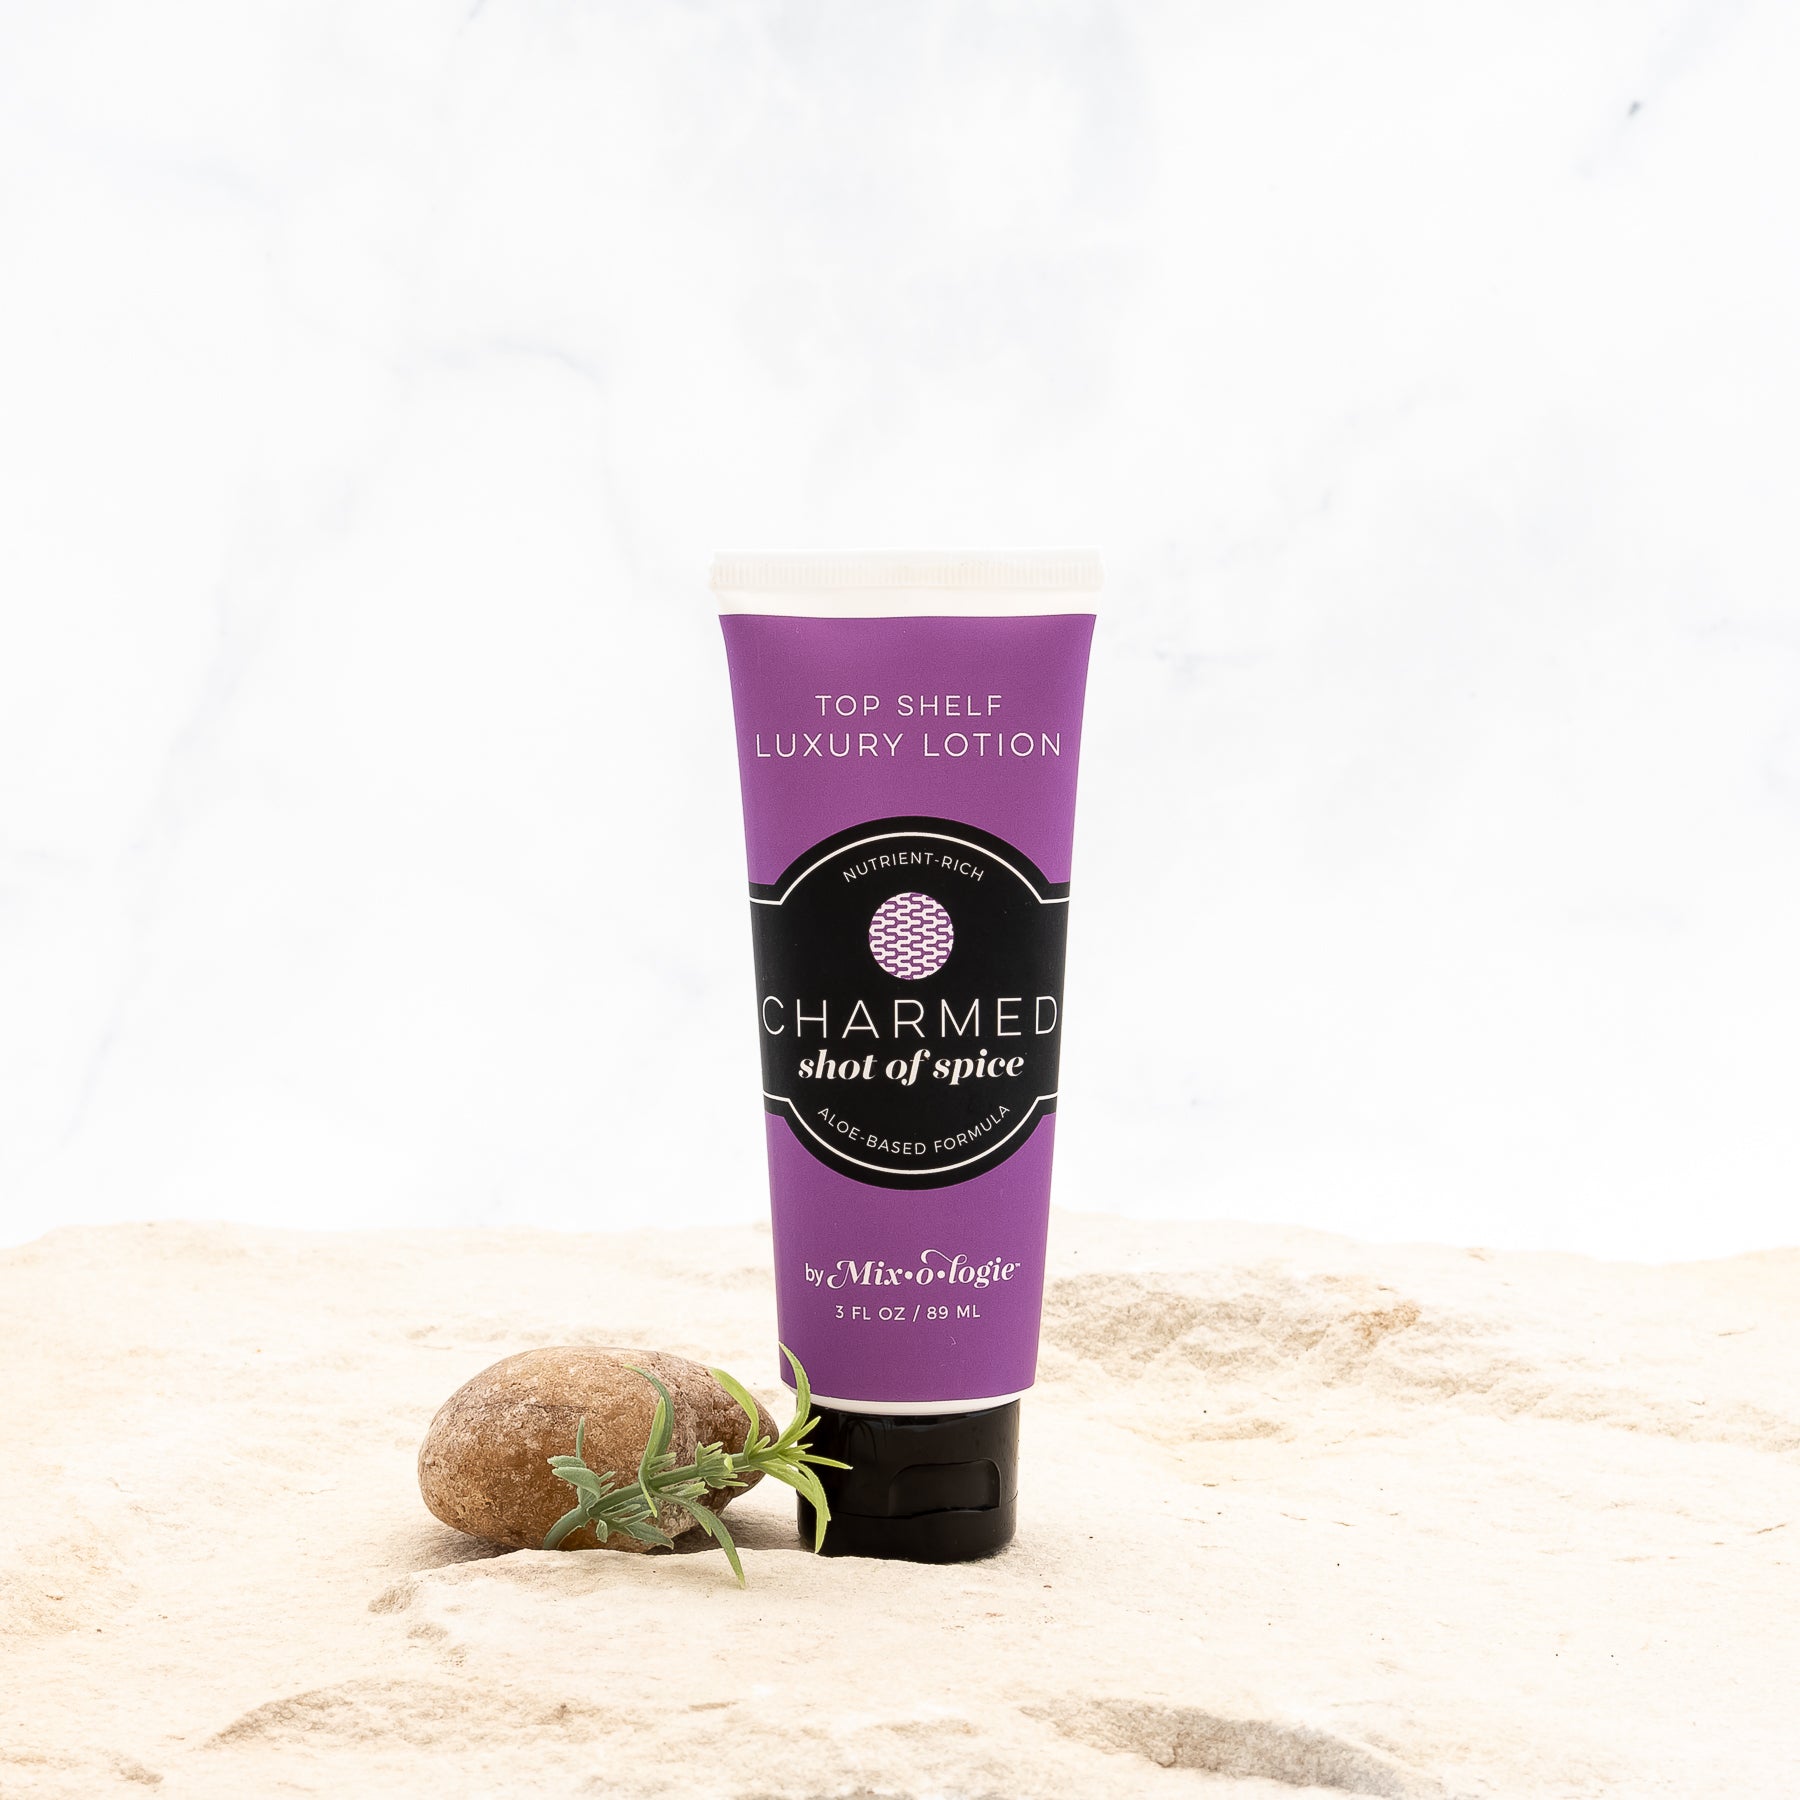 Charmed (Shot of Spice) Top Shelf Lotion in dark purple tube with black lid and label. Nutrient rich, aloe-based formula, tube has 5 fl oz or 89 mL. Pictured with white background, sand, rocks, and greenery. 